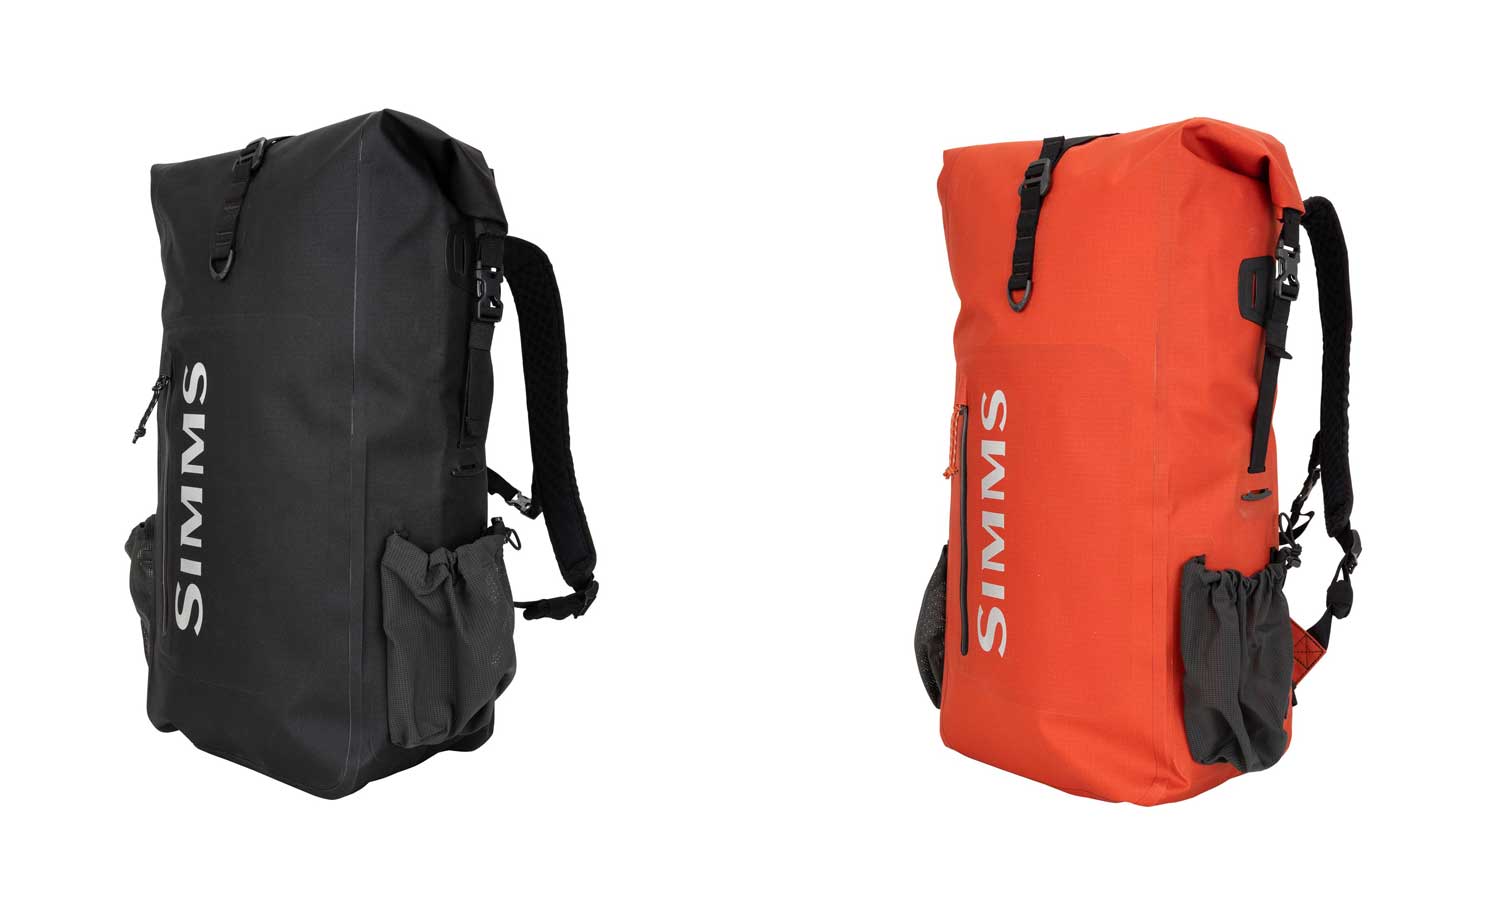 Simms Dry Creek Backpack Review - Untamed Flies and Tackle